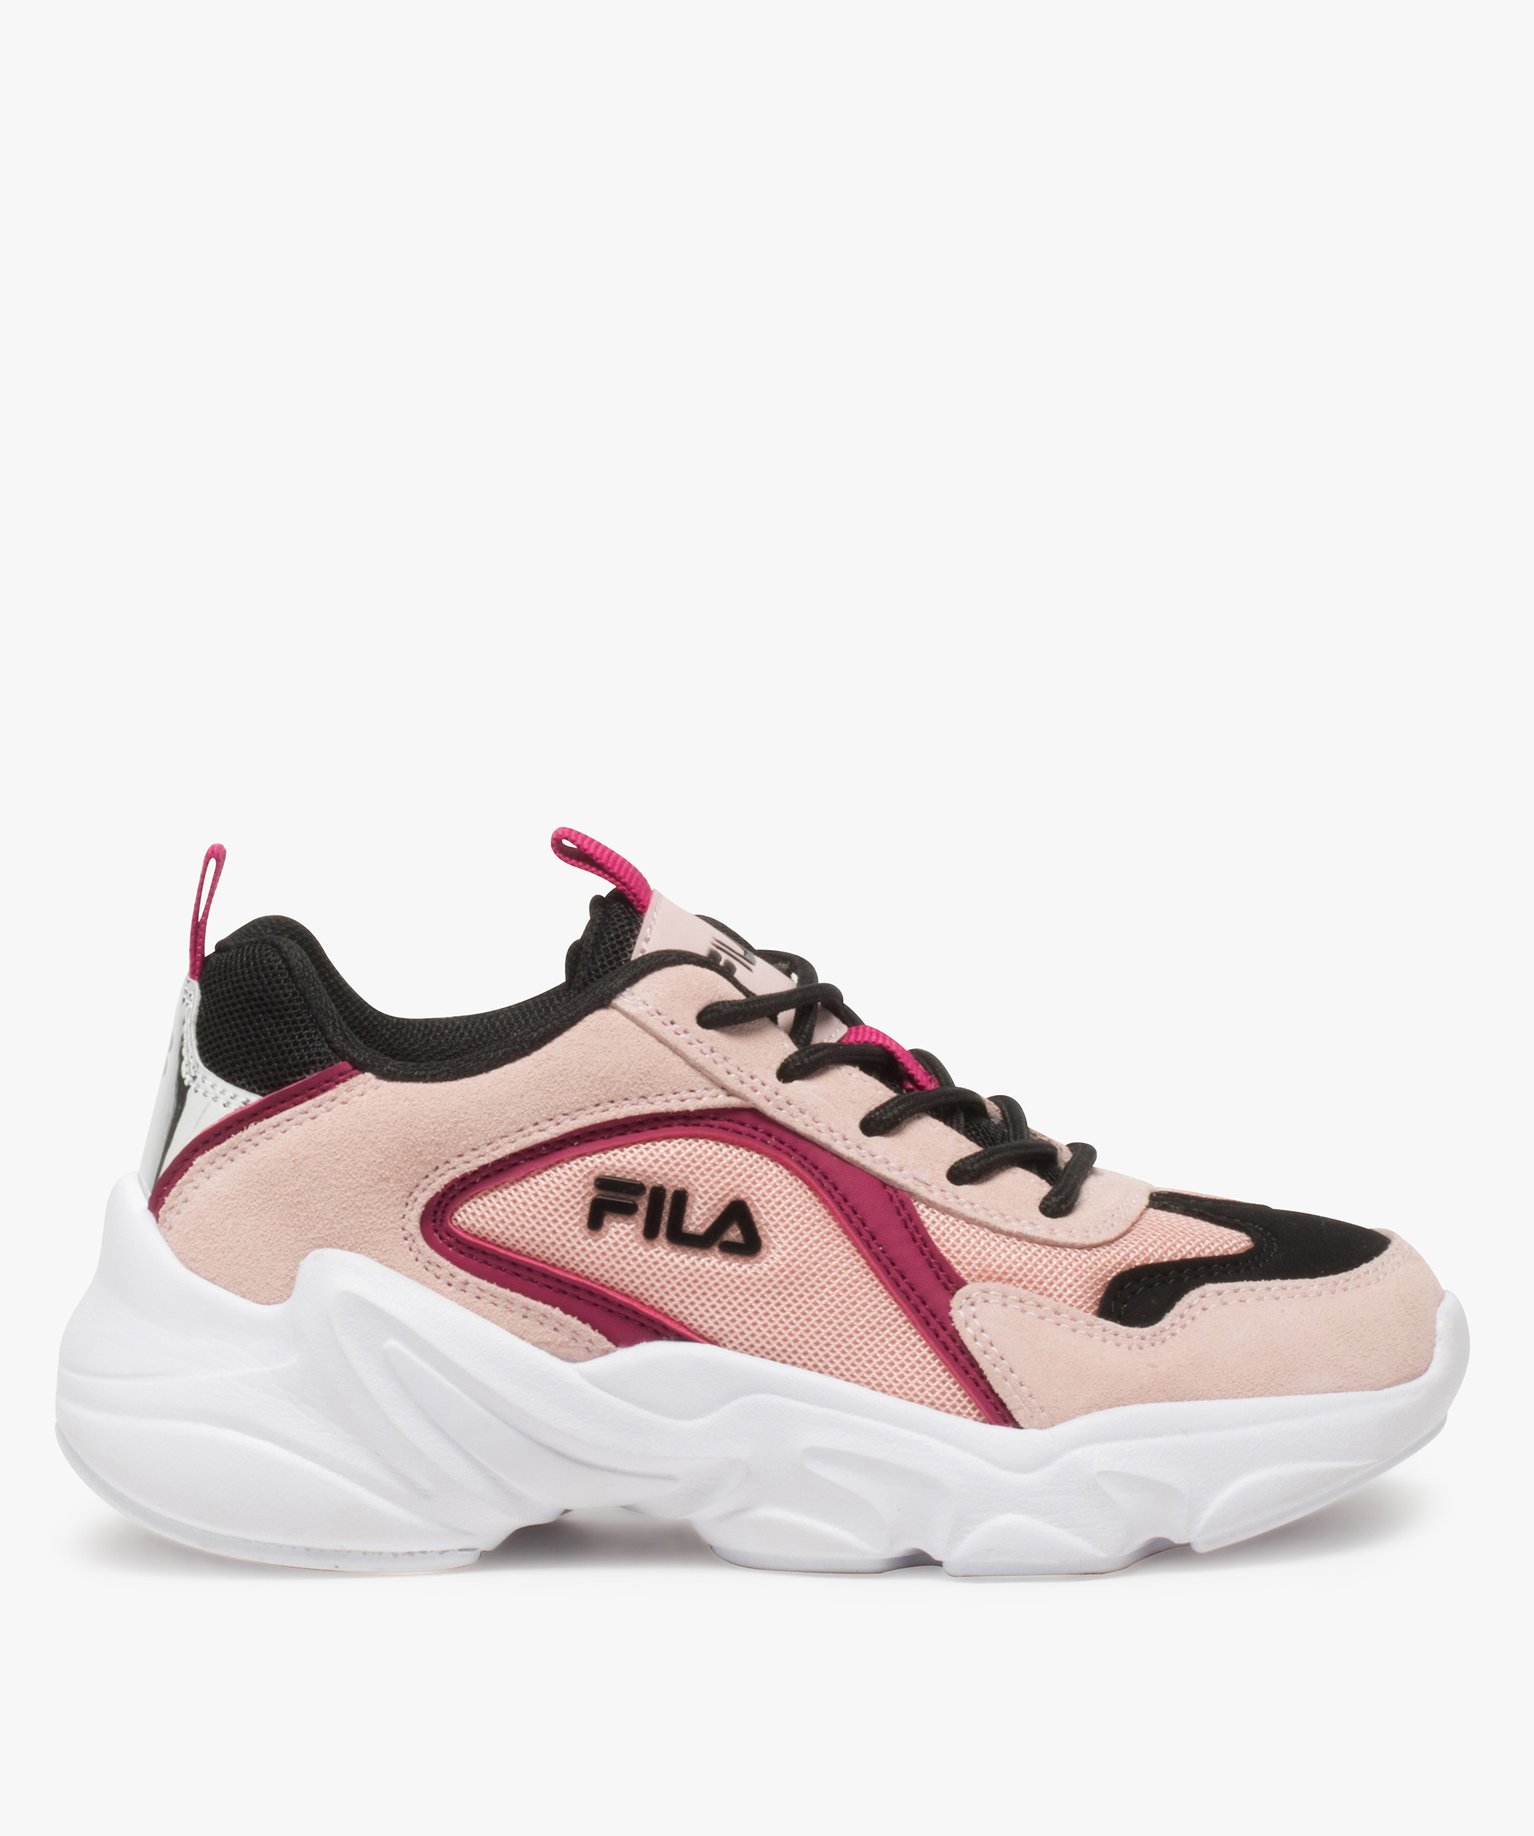 baskets fille running multi-matieres a lacets - fila rose baskets